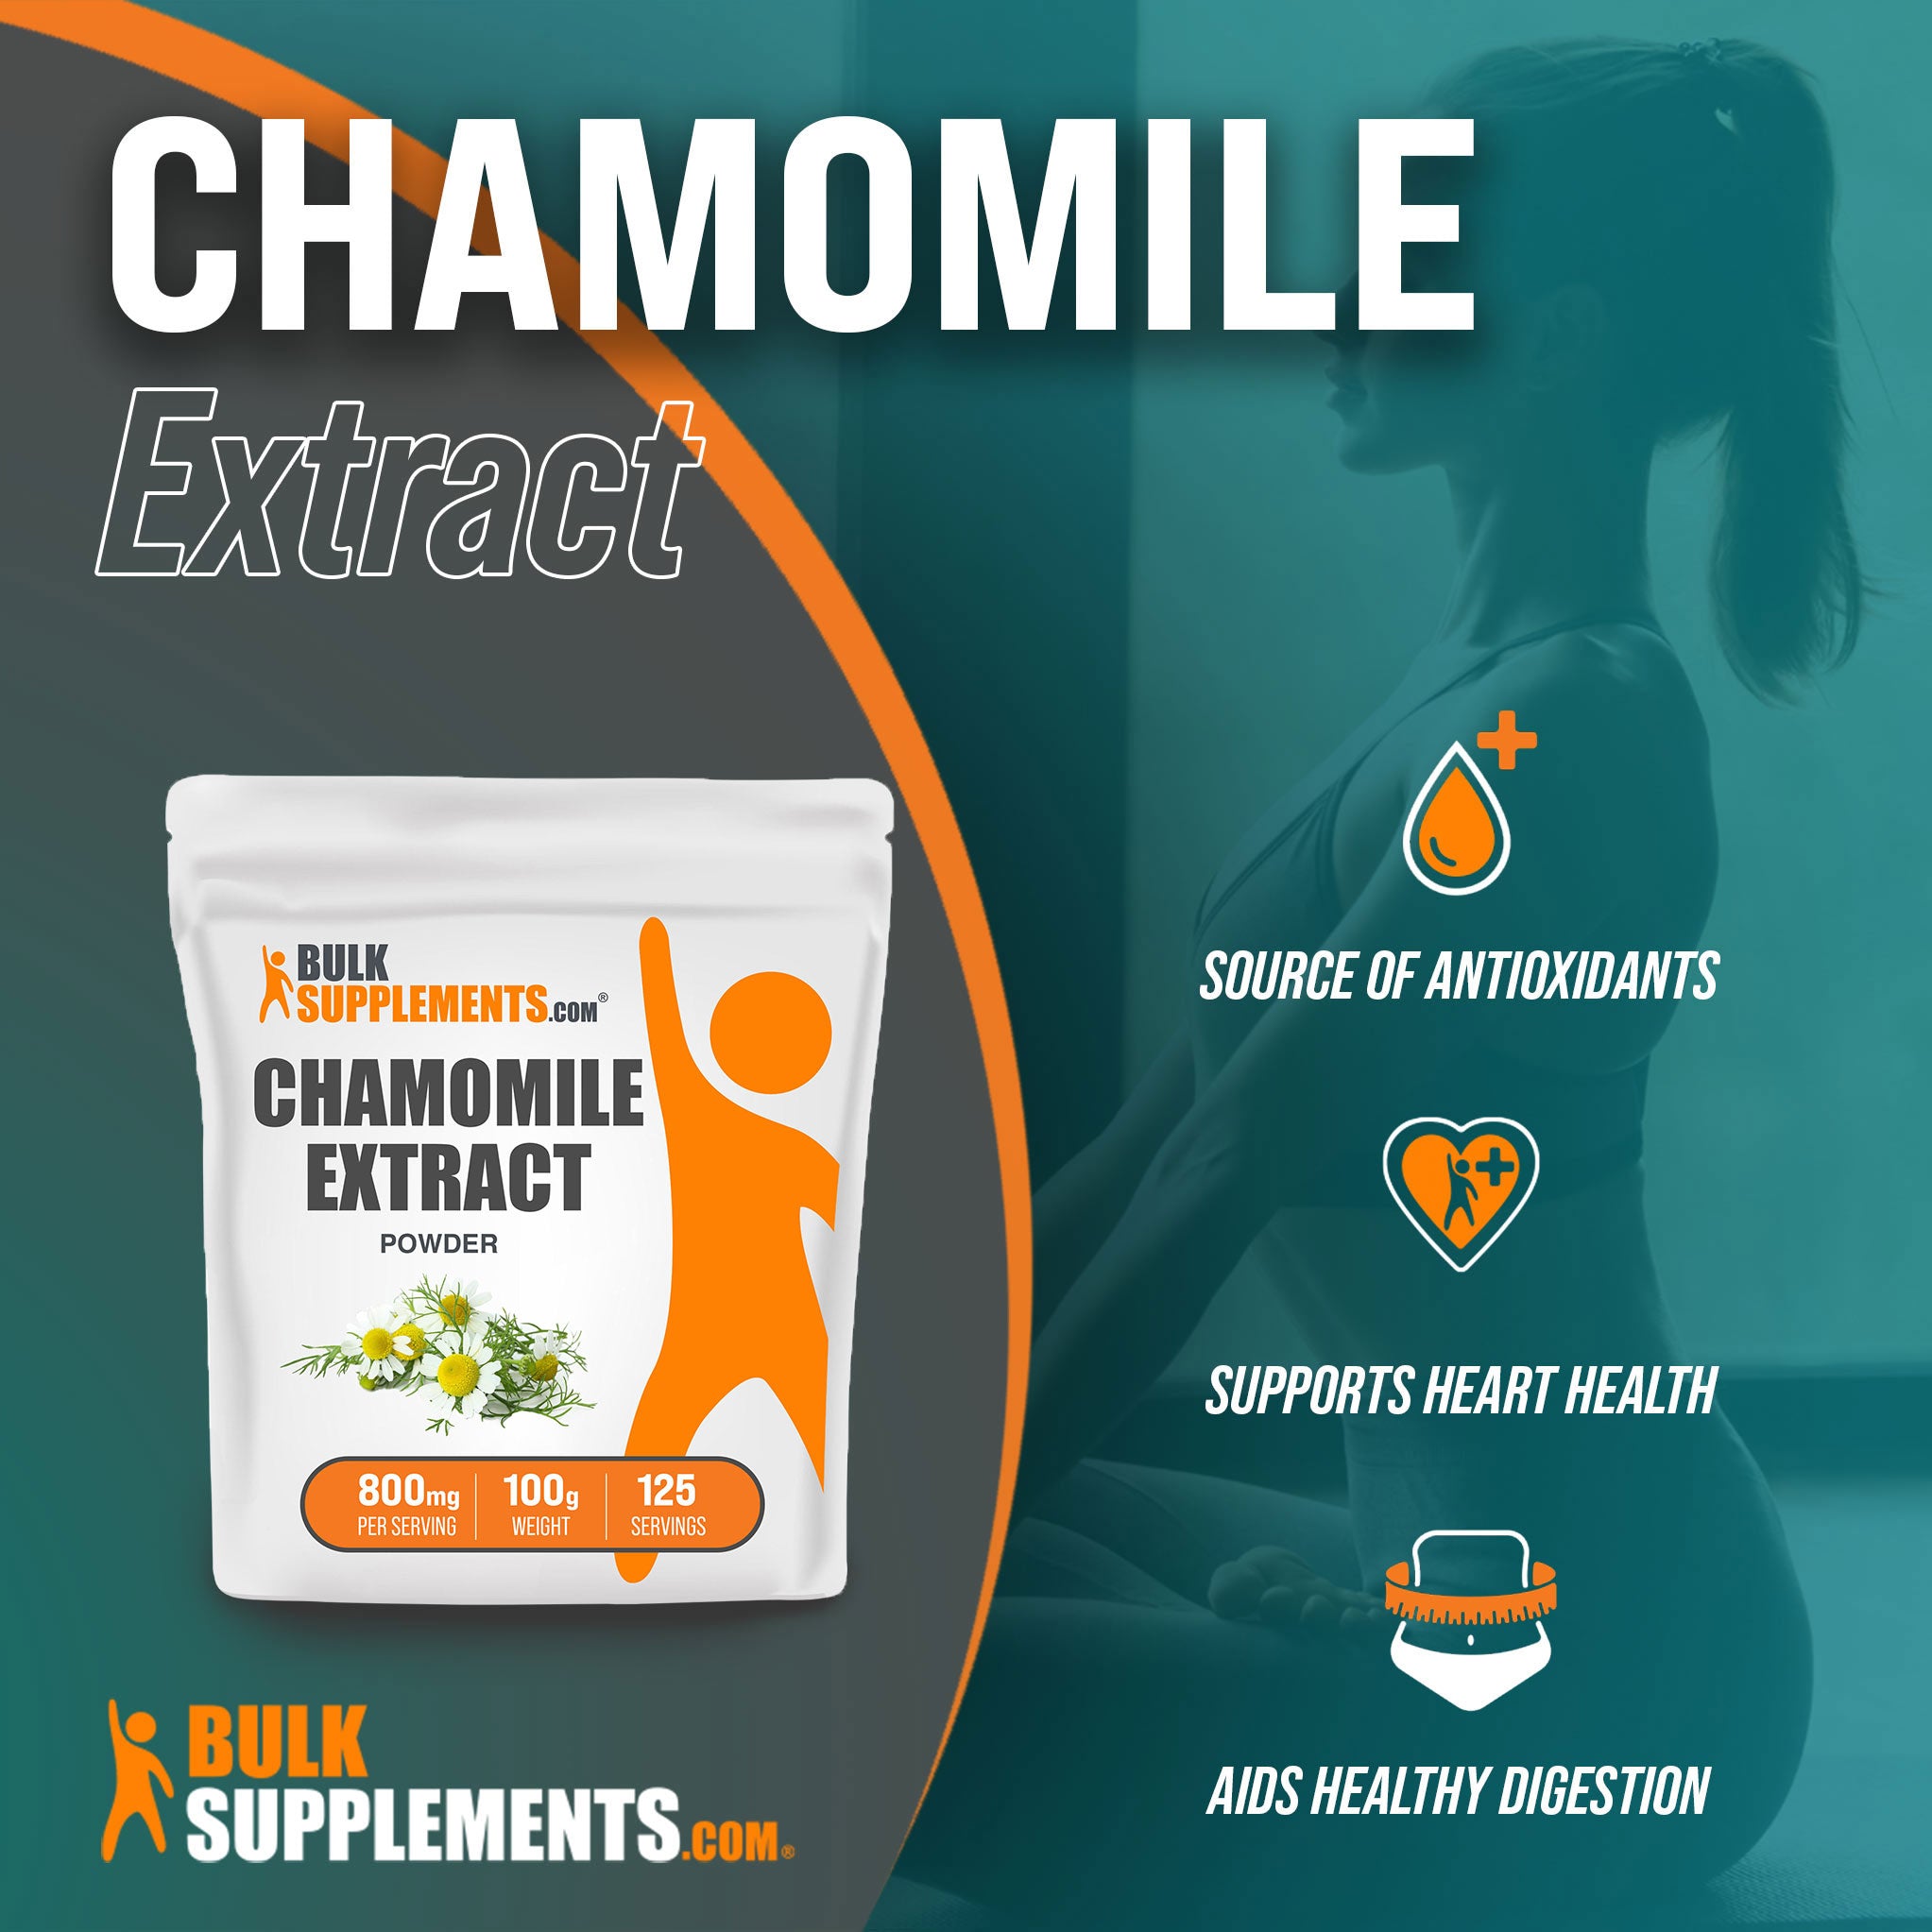 Benefits of our 100g Chamomile Extract herbal supplements; source of antioxidants, supports heart health, aids healthy digestion